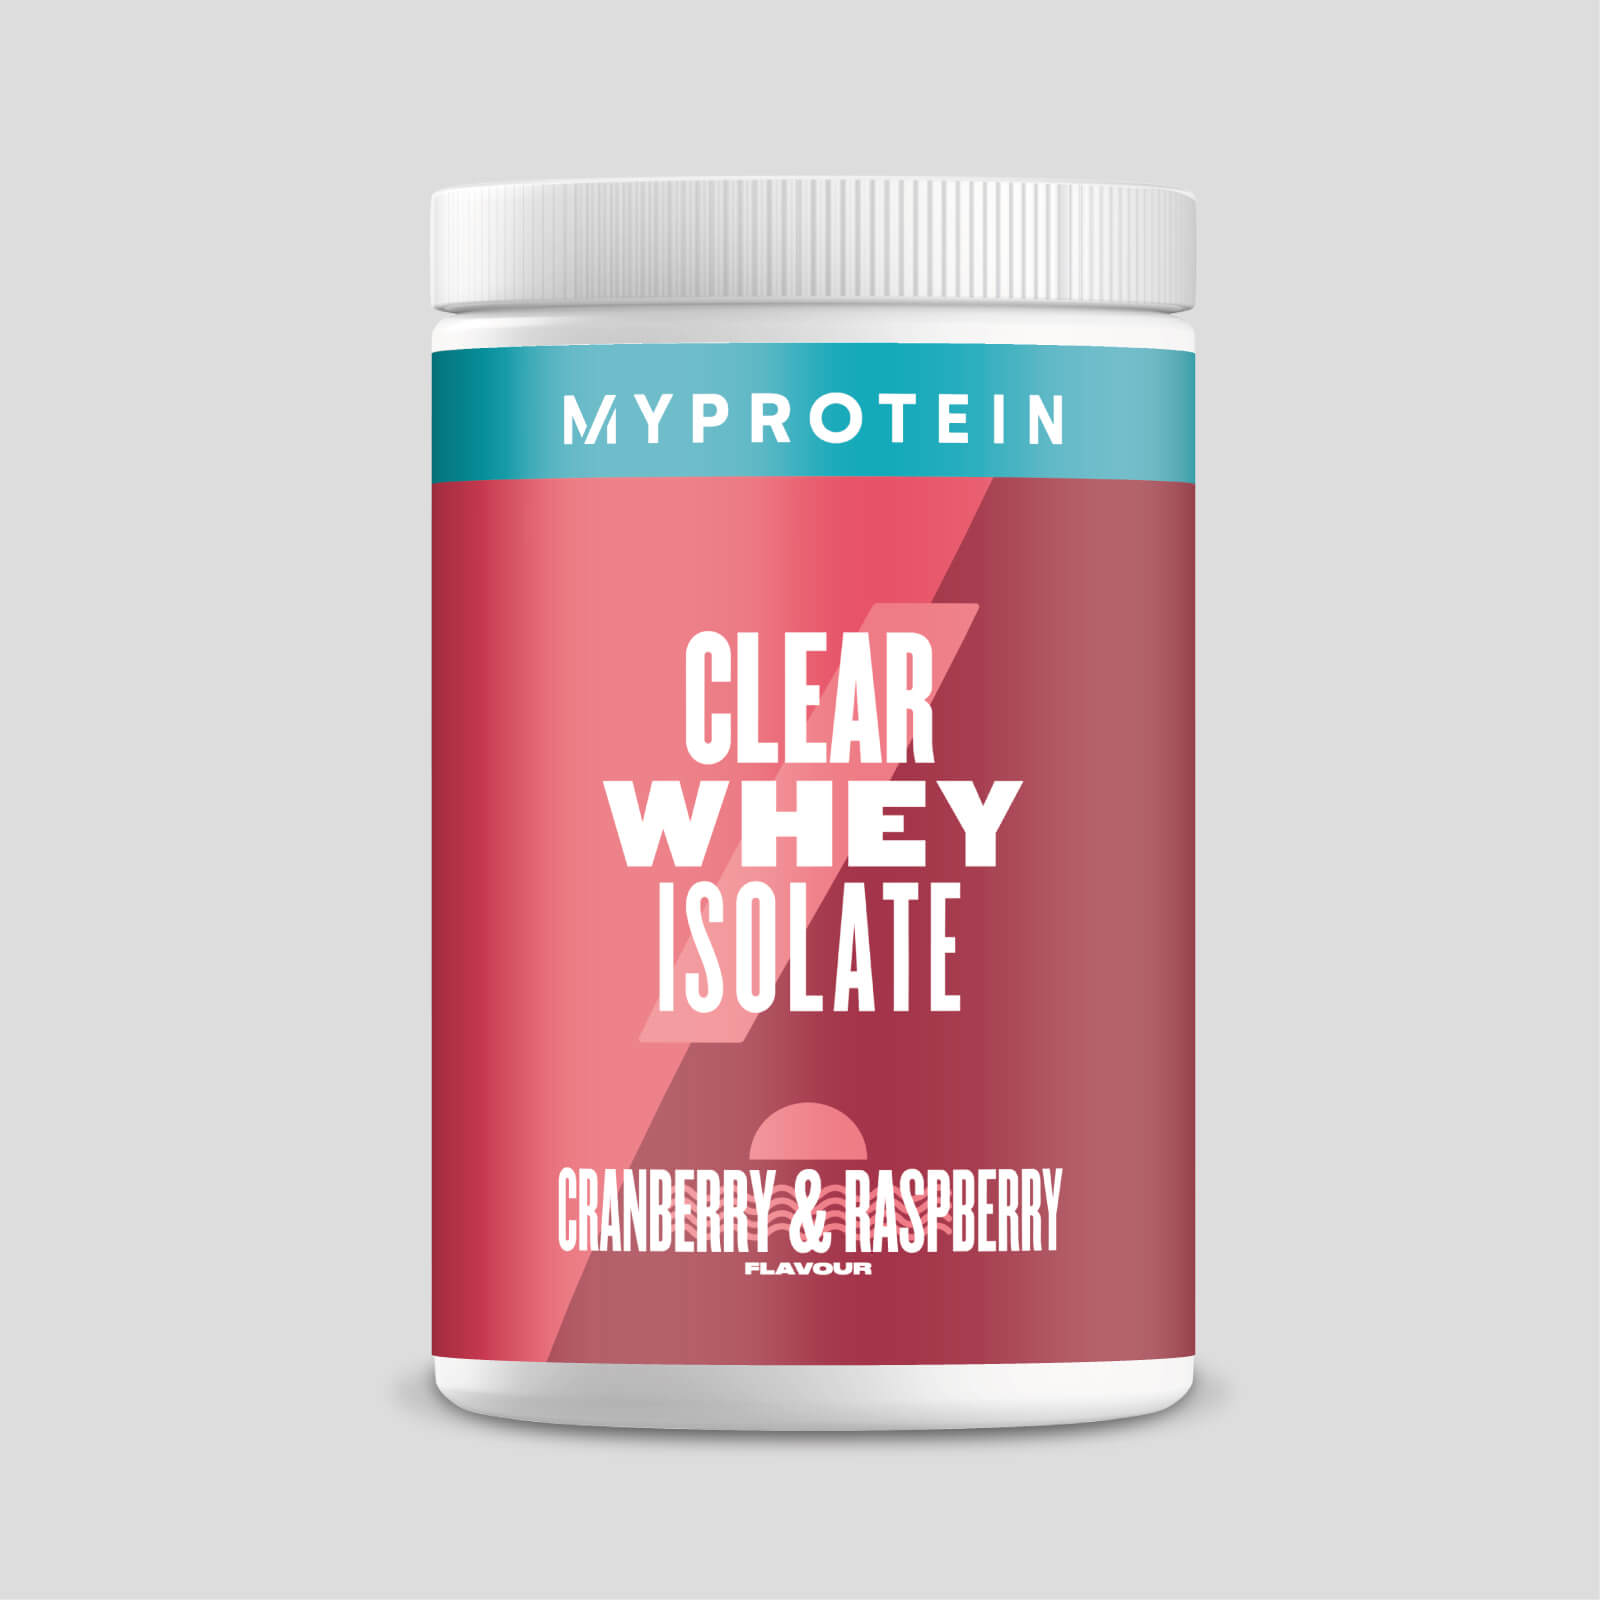 Myprotein Clear Whey Proteín - 35servings - Cranberry & Raspberry